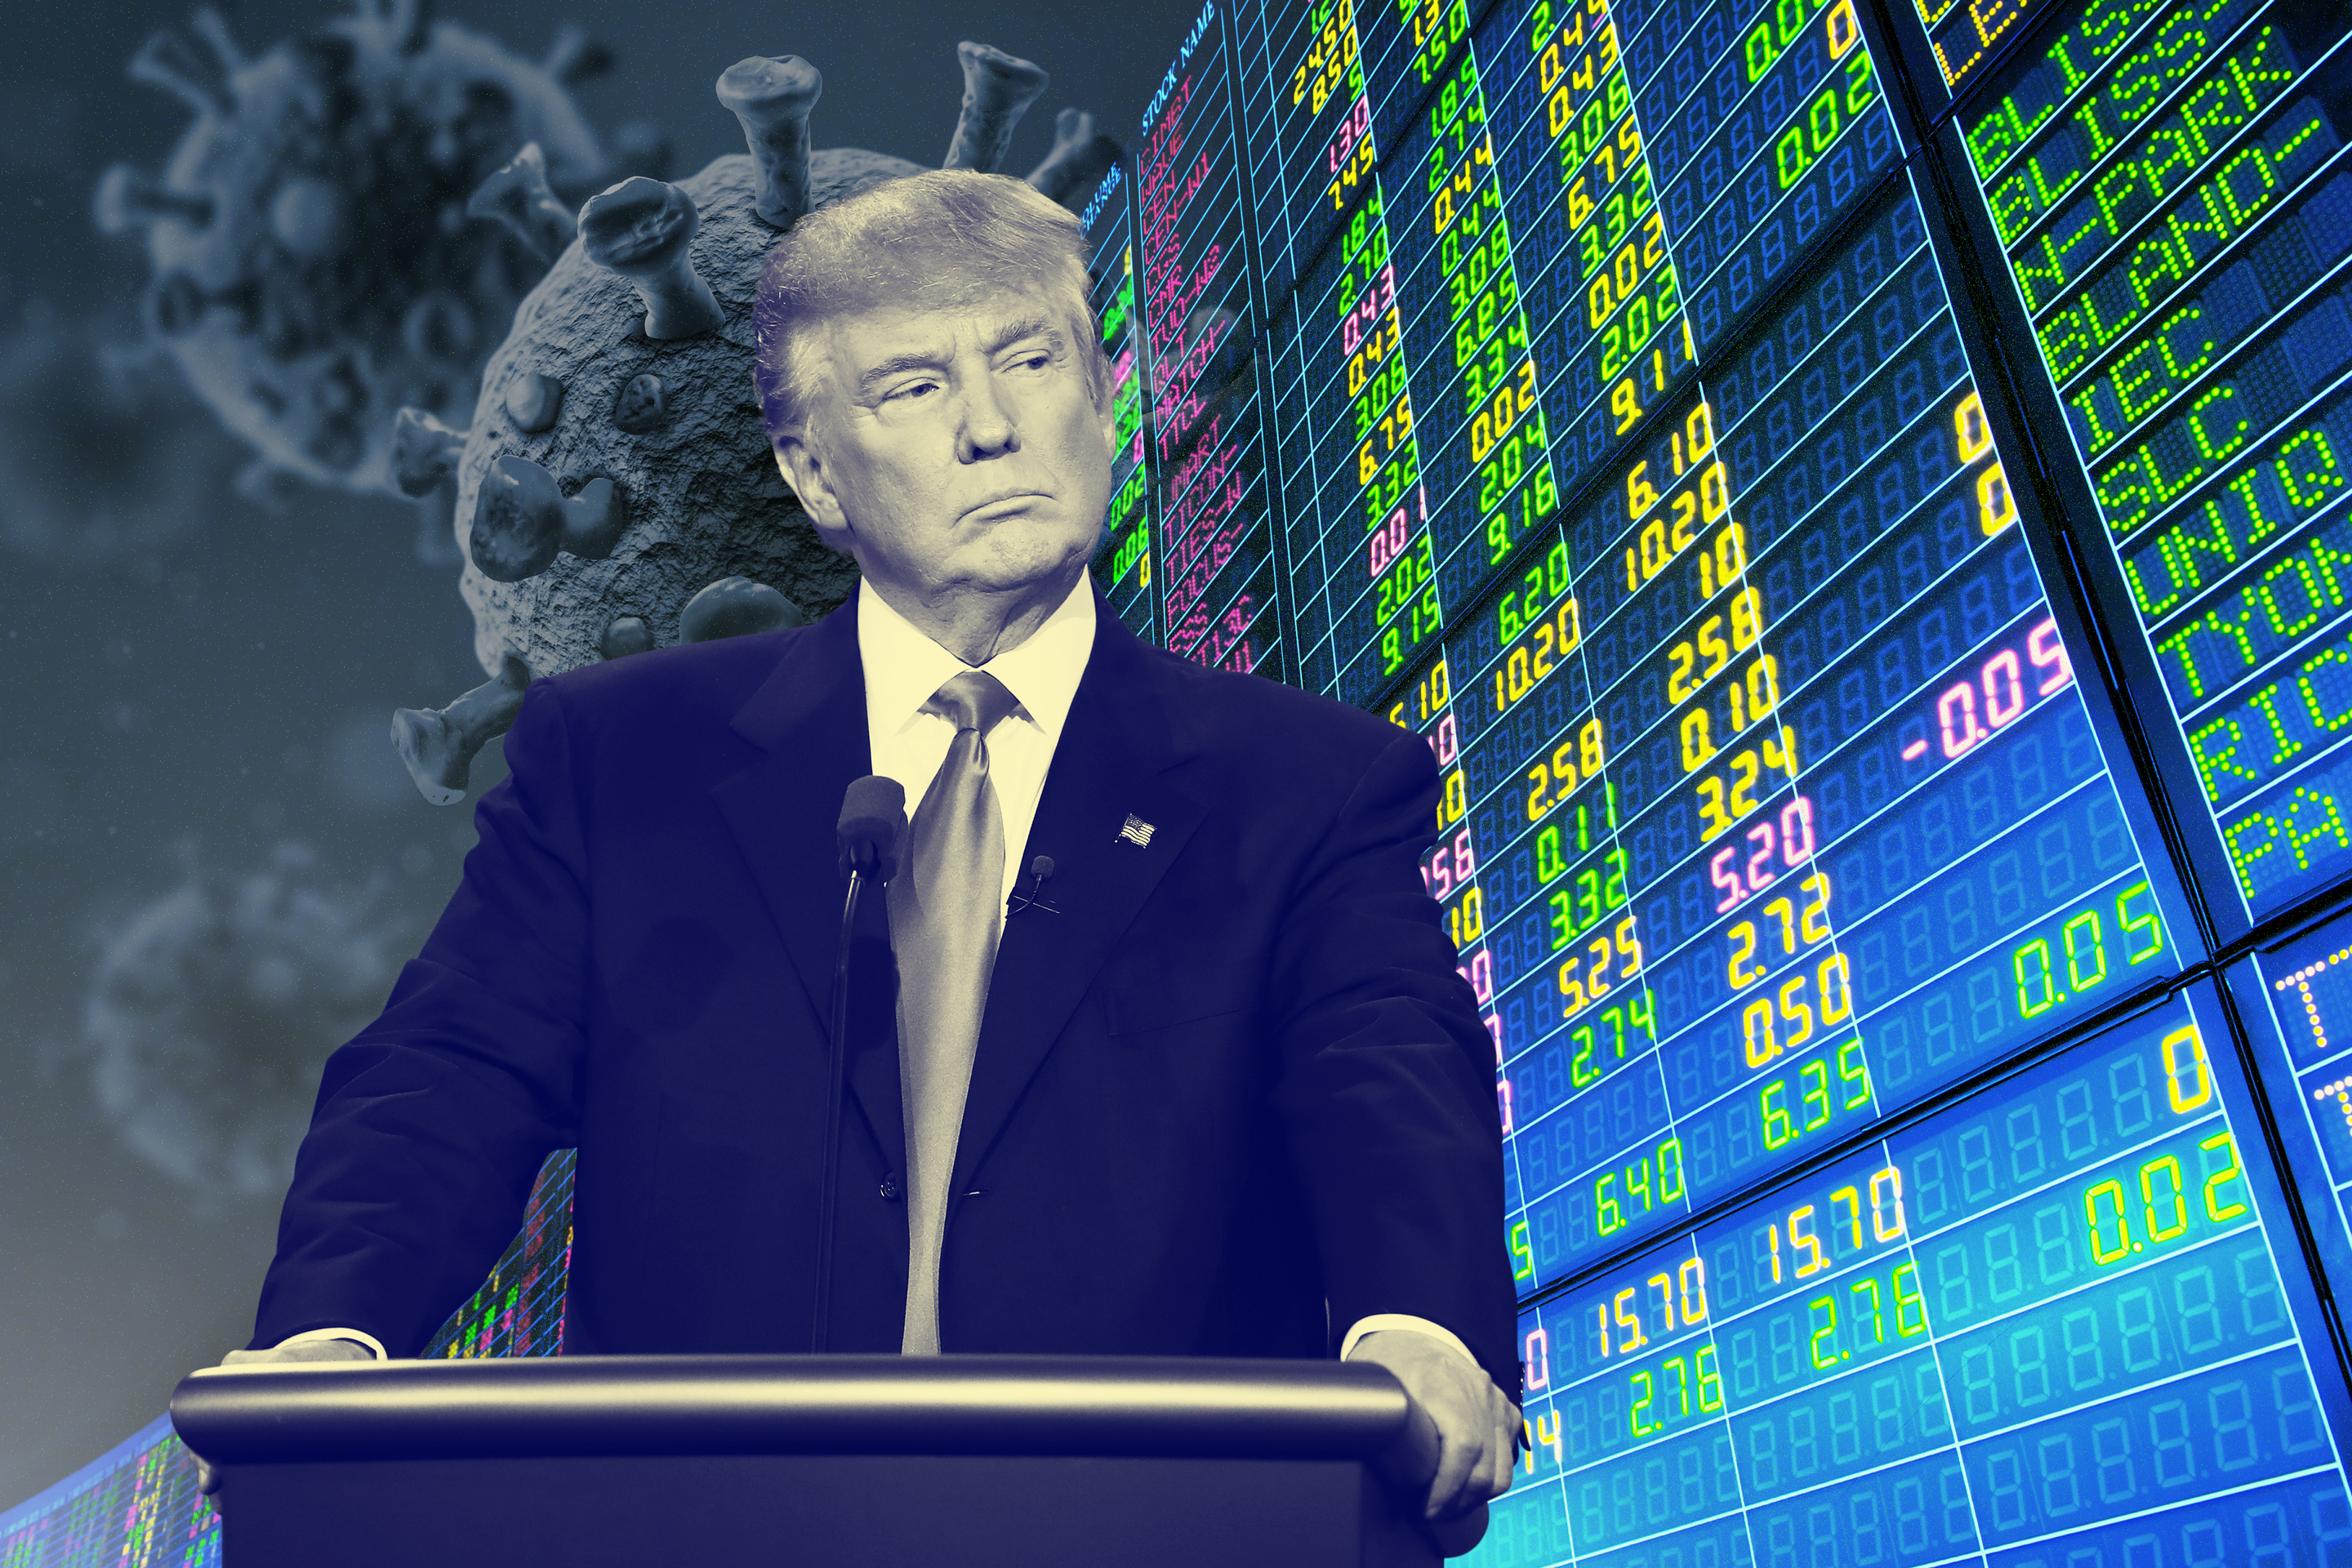 Trump's Positive COVID-19 Test Is Rattling Markets. Where Are Stocks Headed Next?